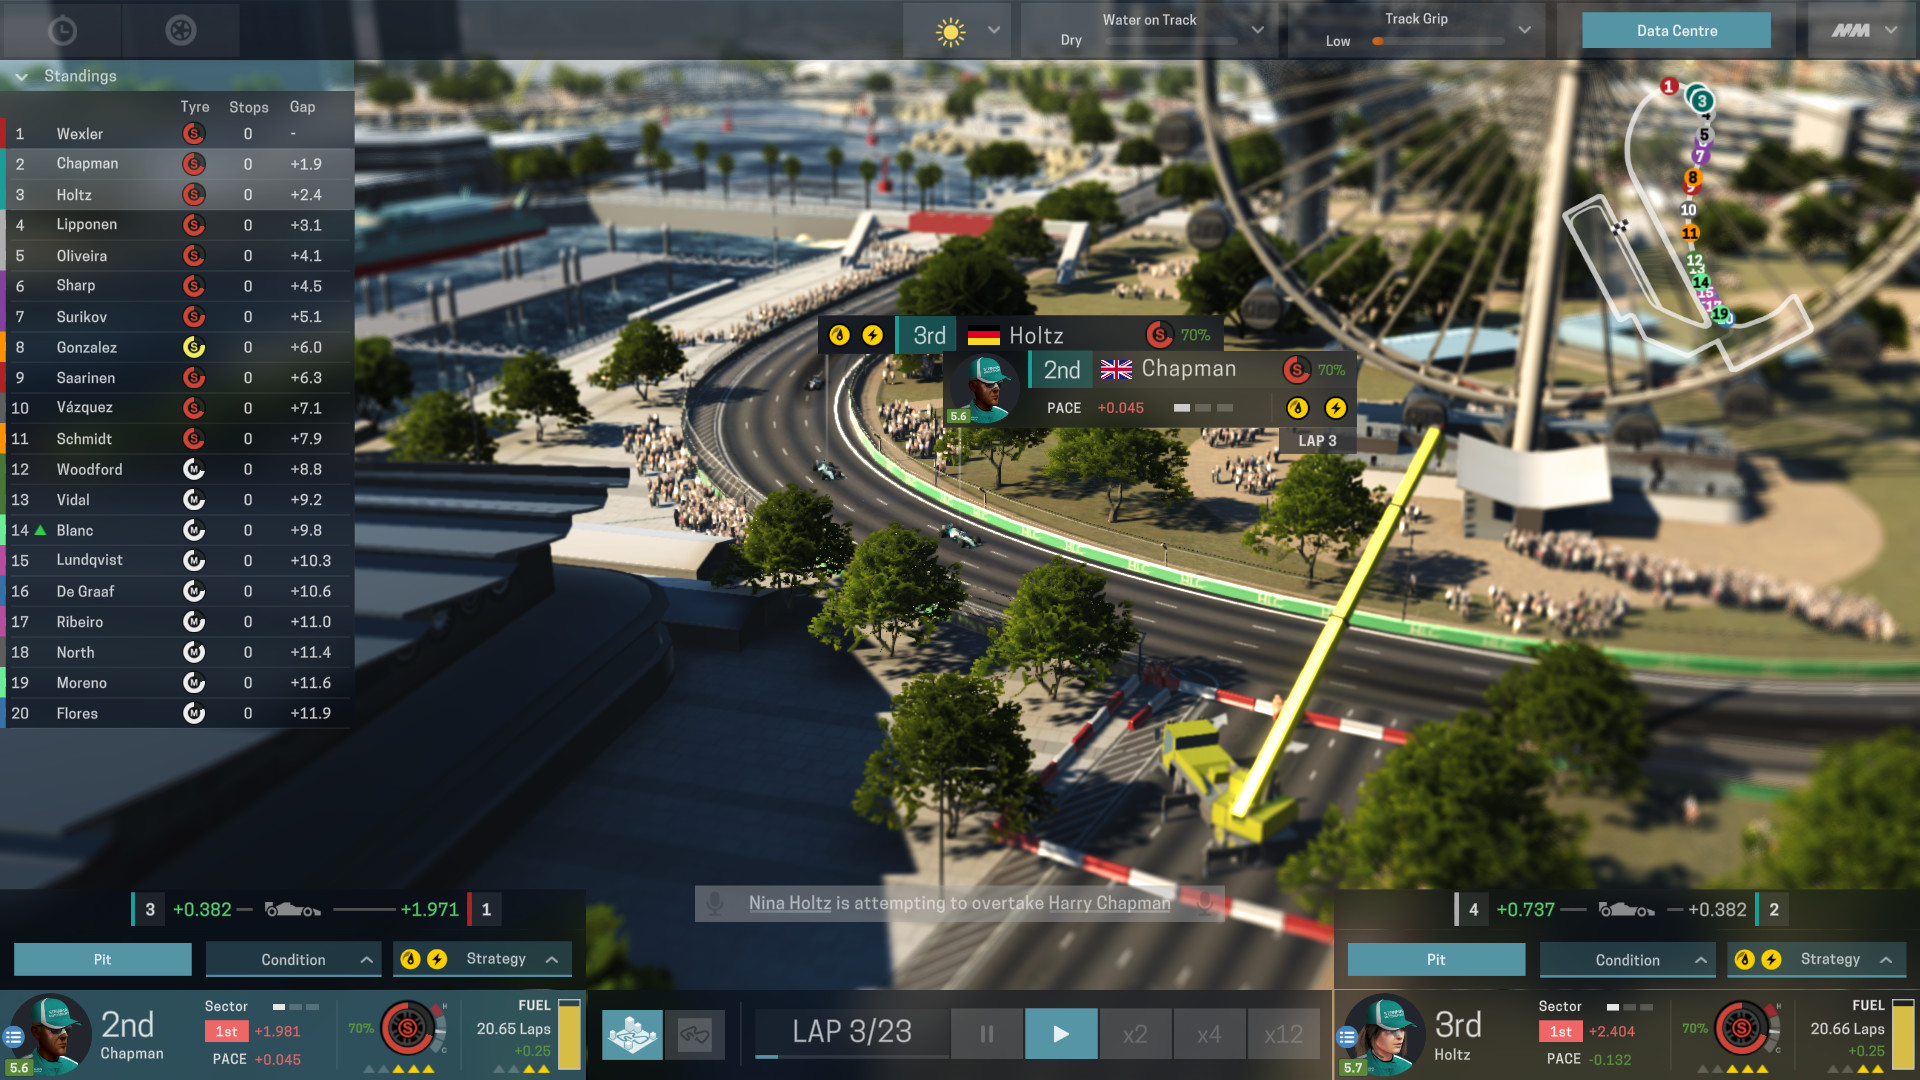 f1 manager browser game